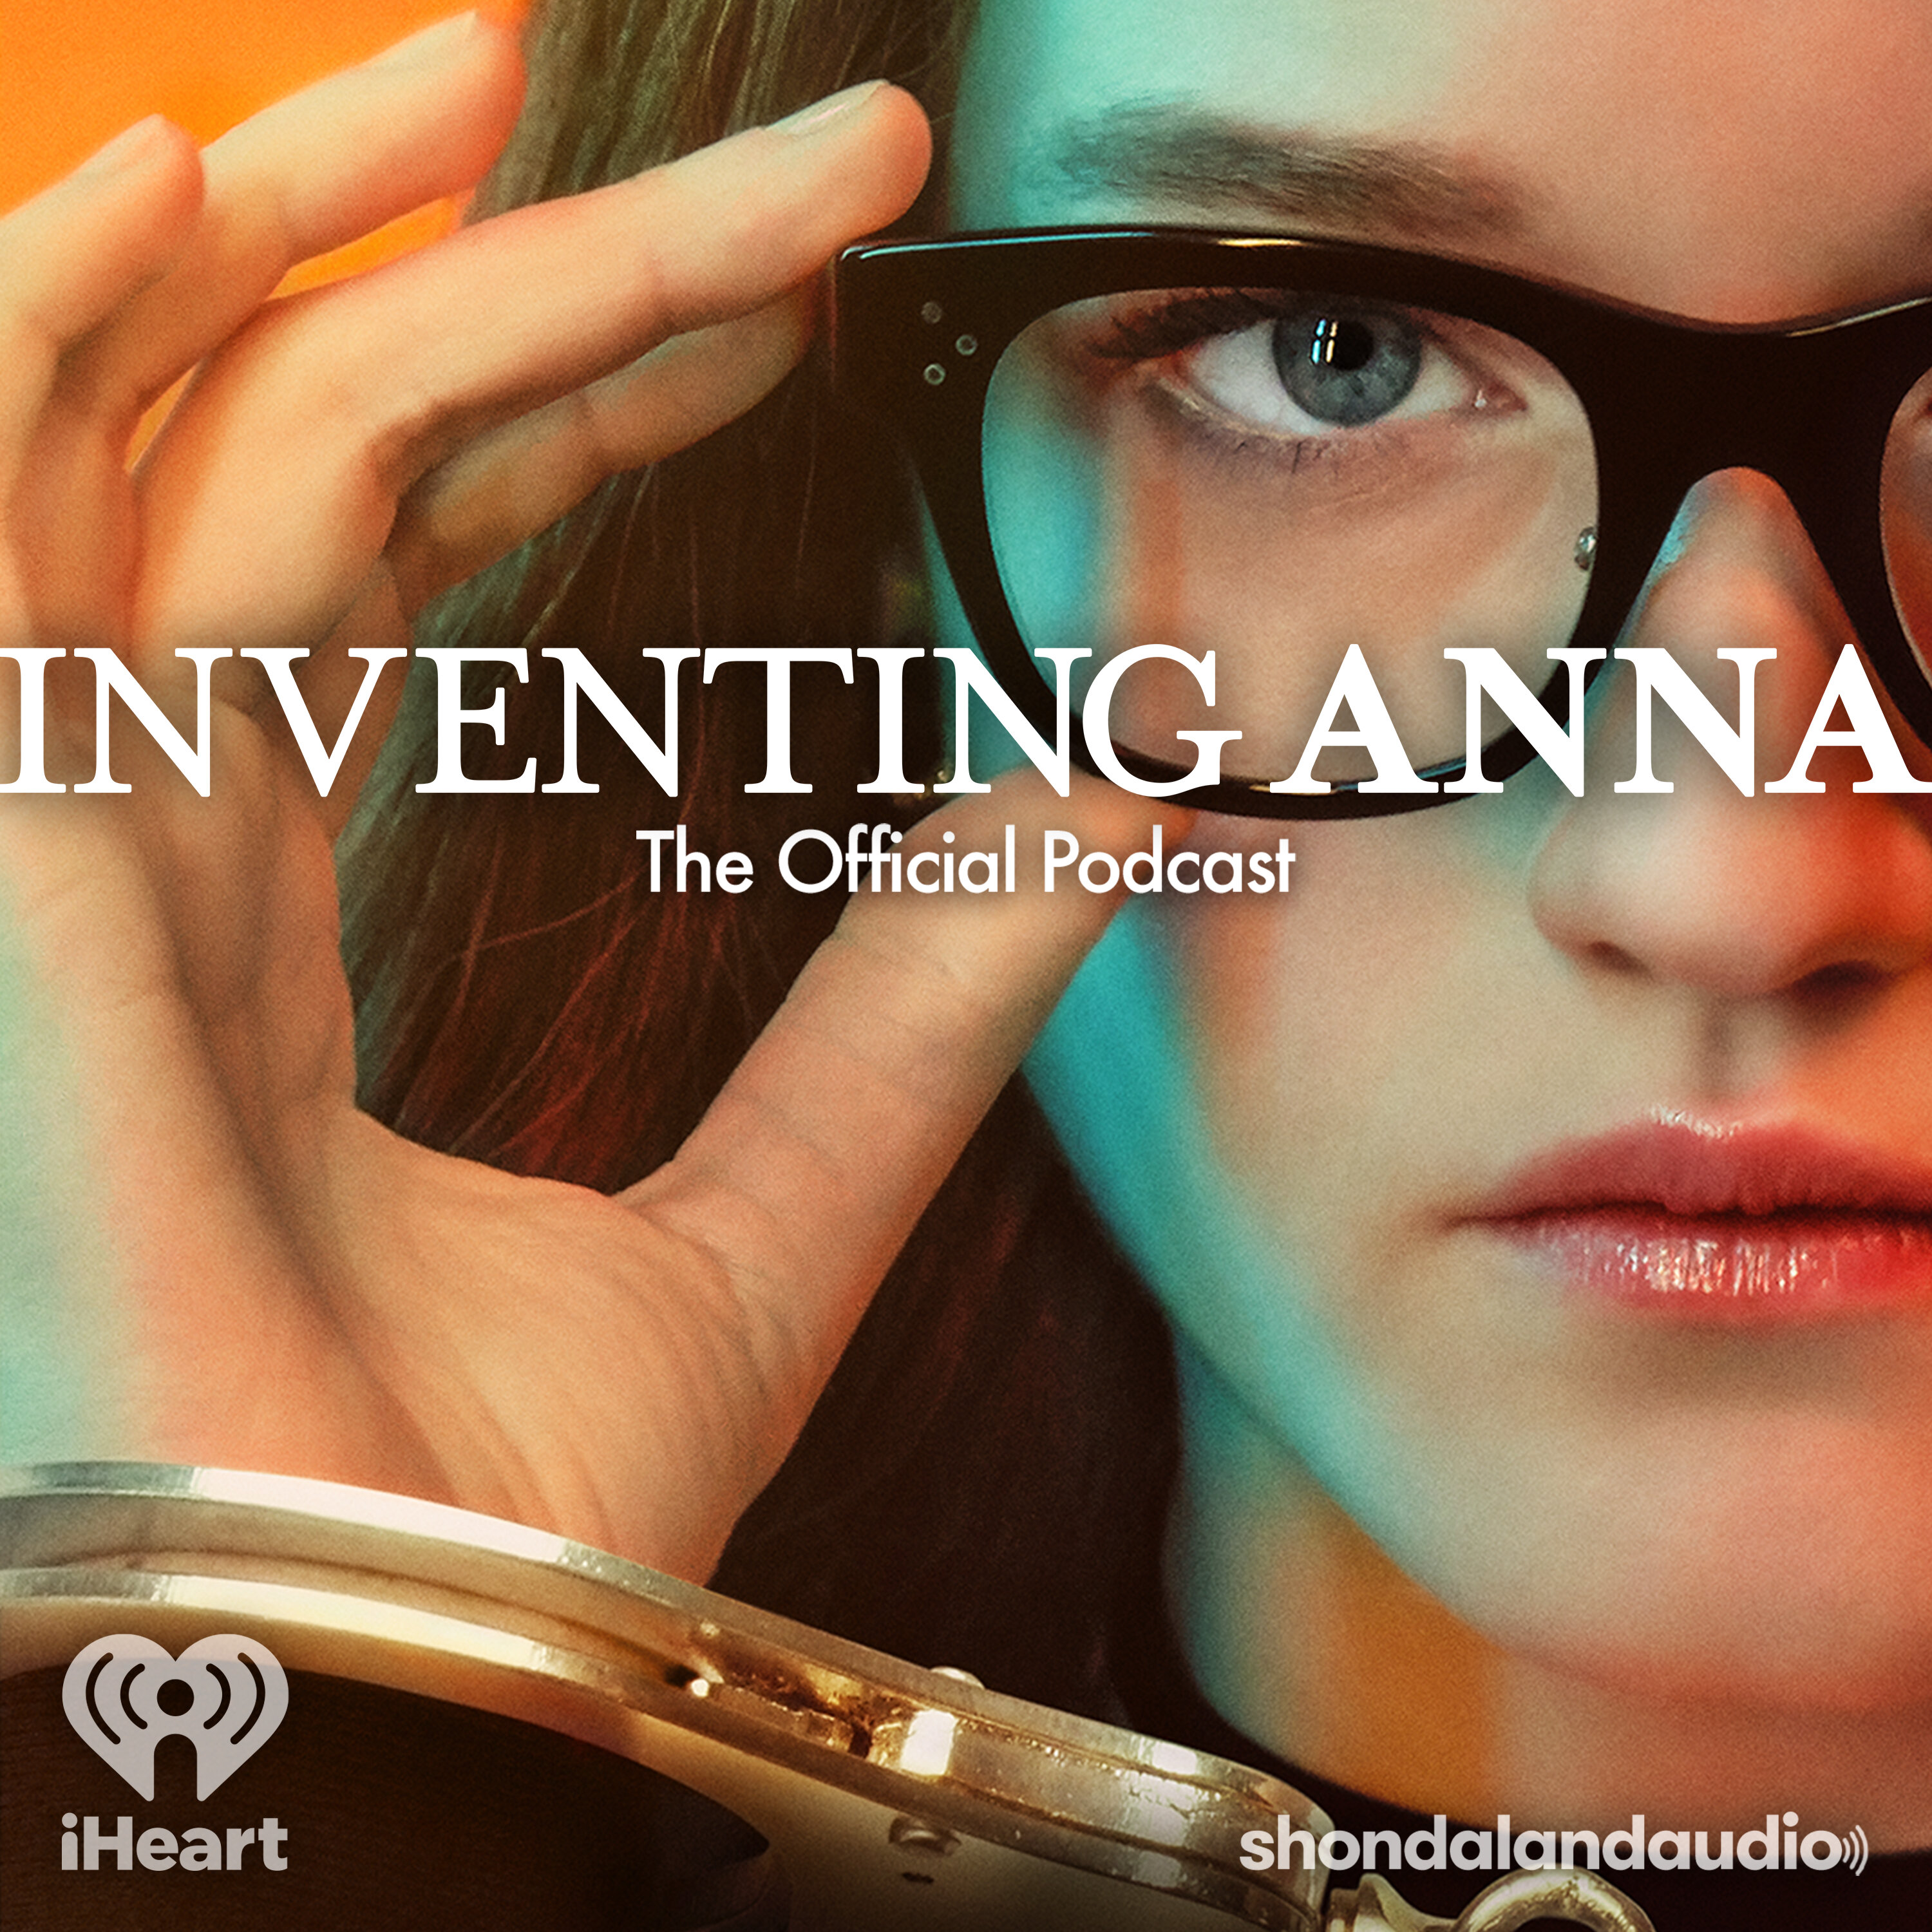 Inventing Anna: The Official Podcast podcast show image